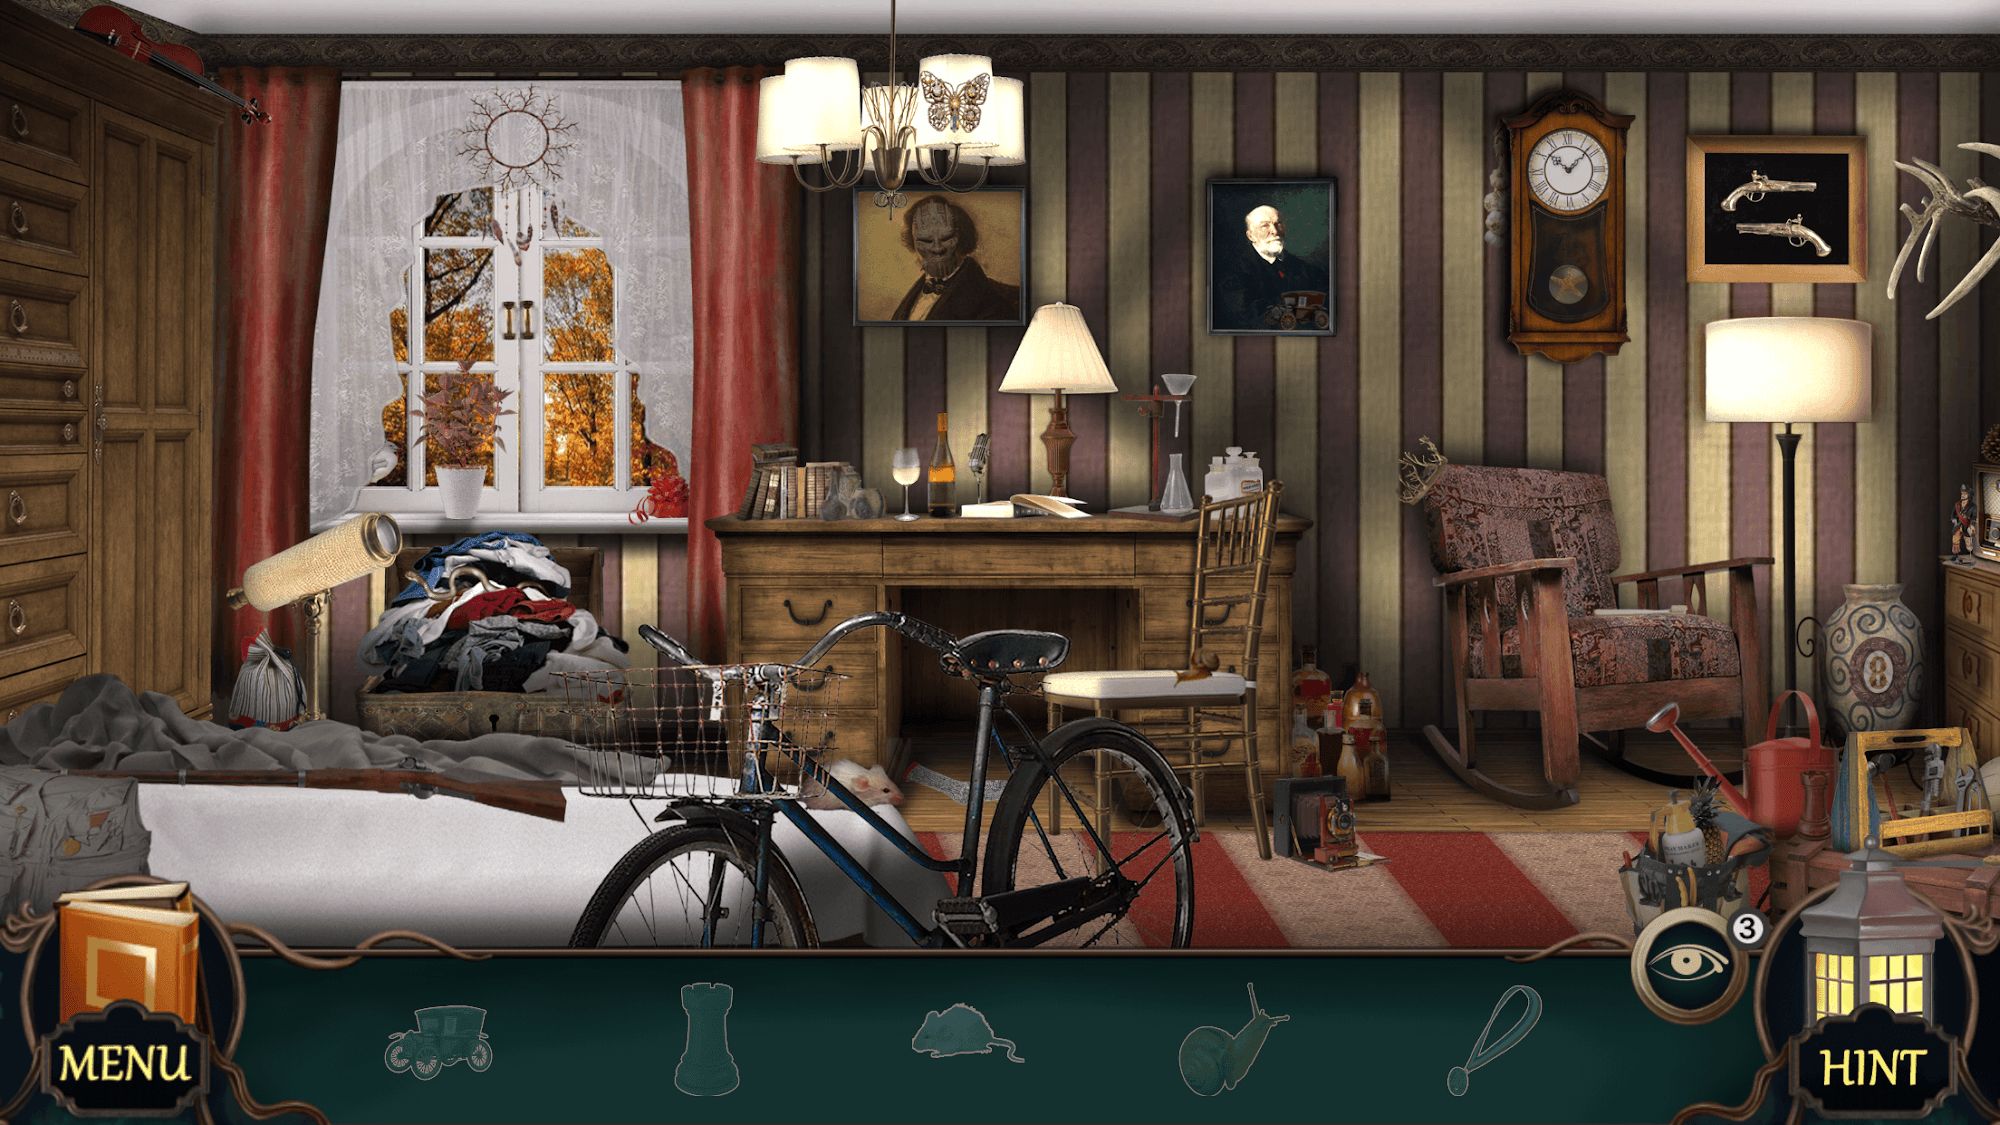 Gameplay of the Mystery Hotel - Seek and Find Hidden Objects Games for Android phone or tablet.